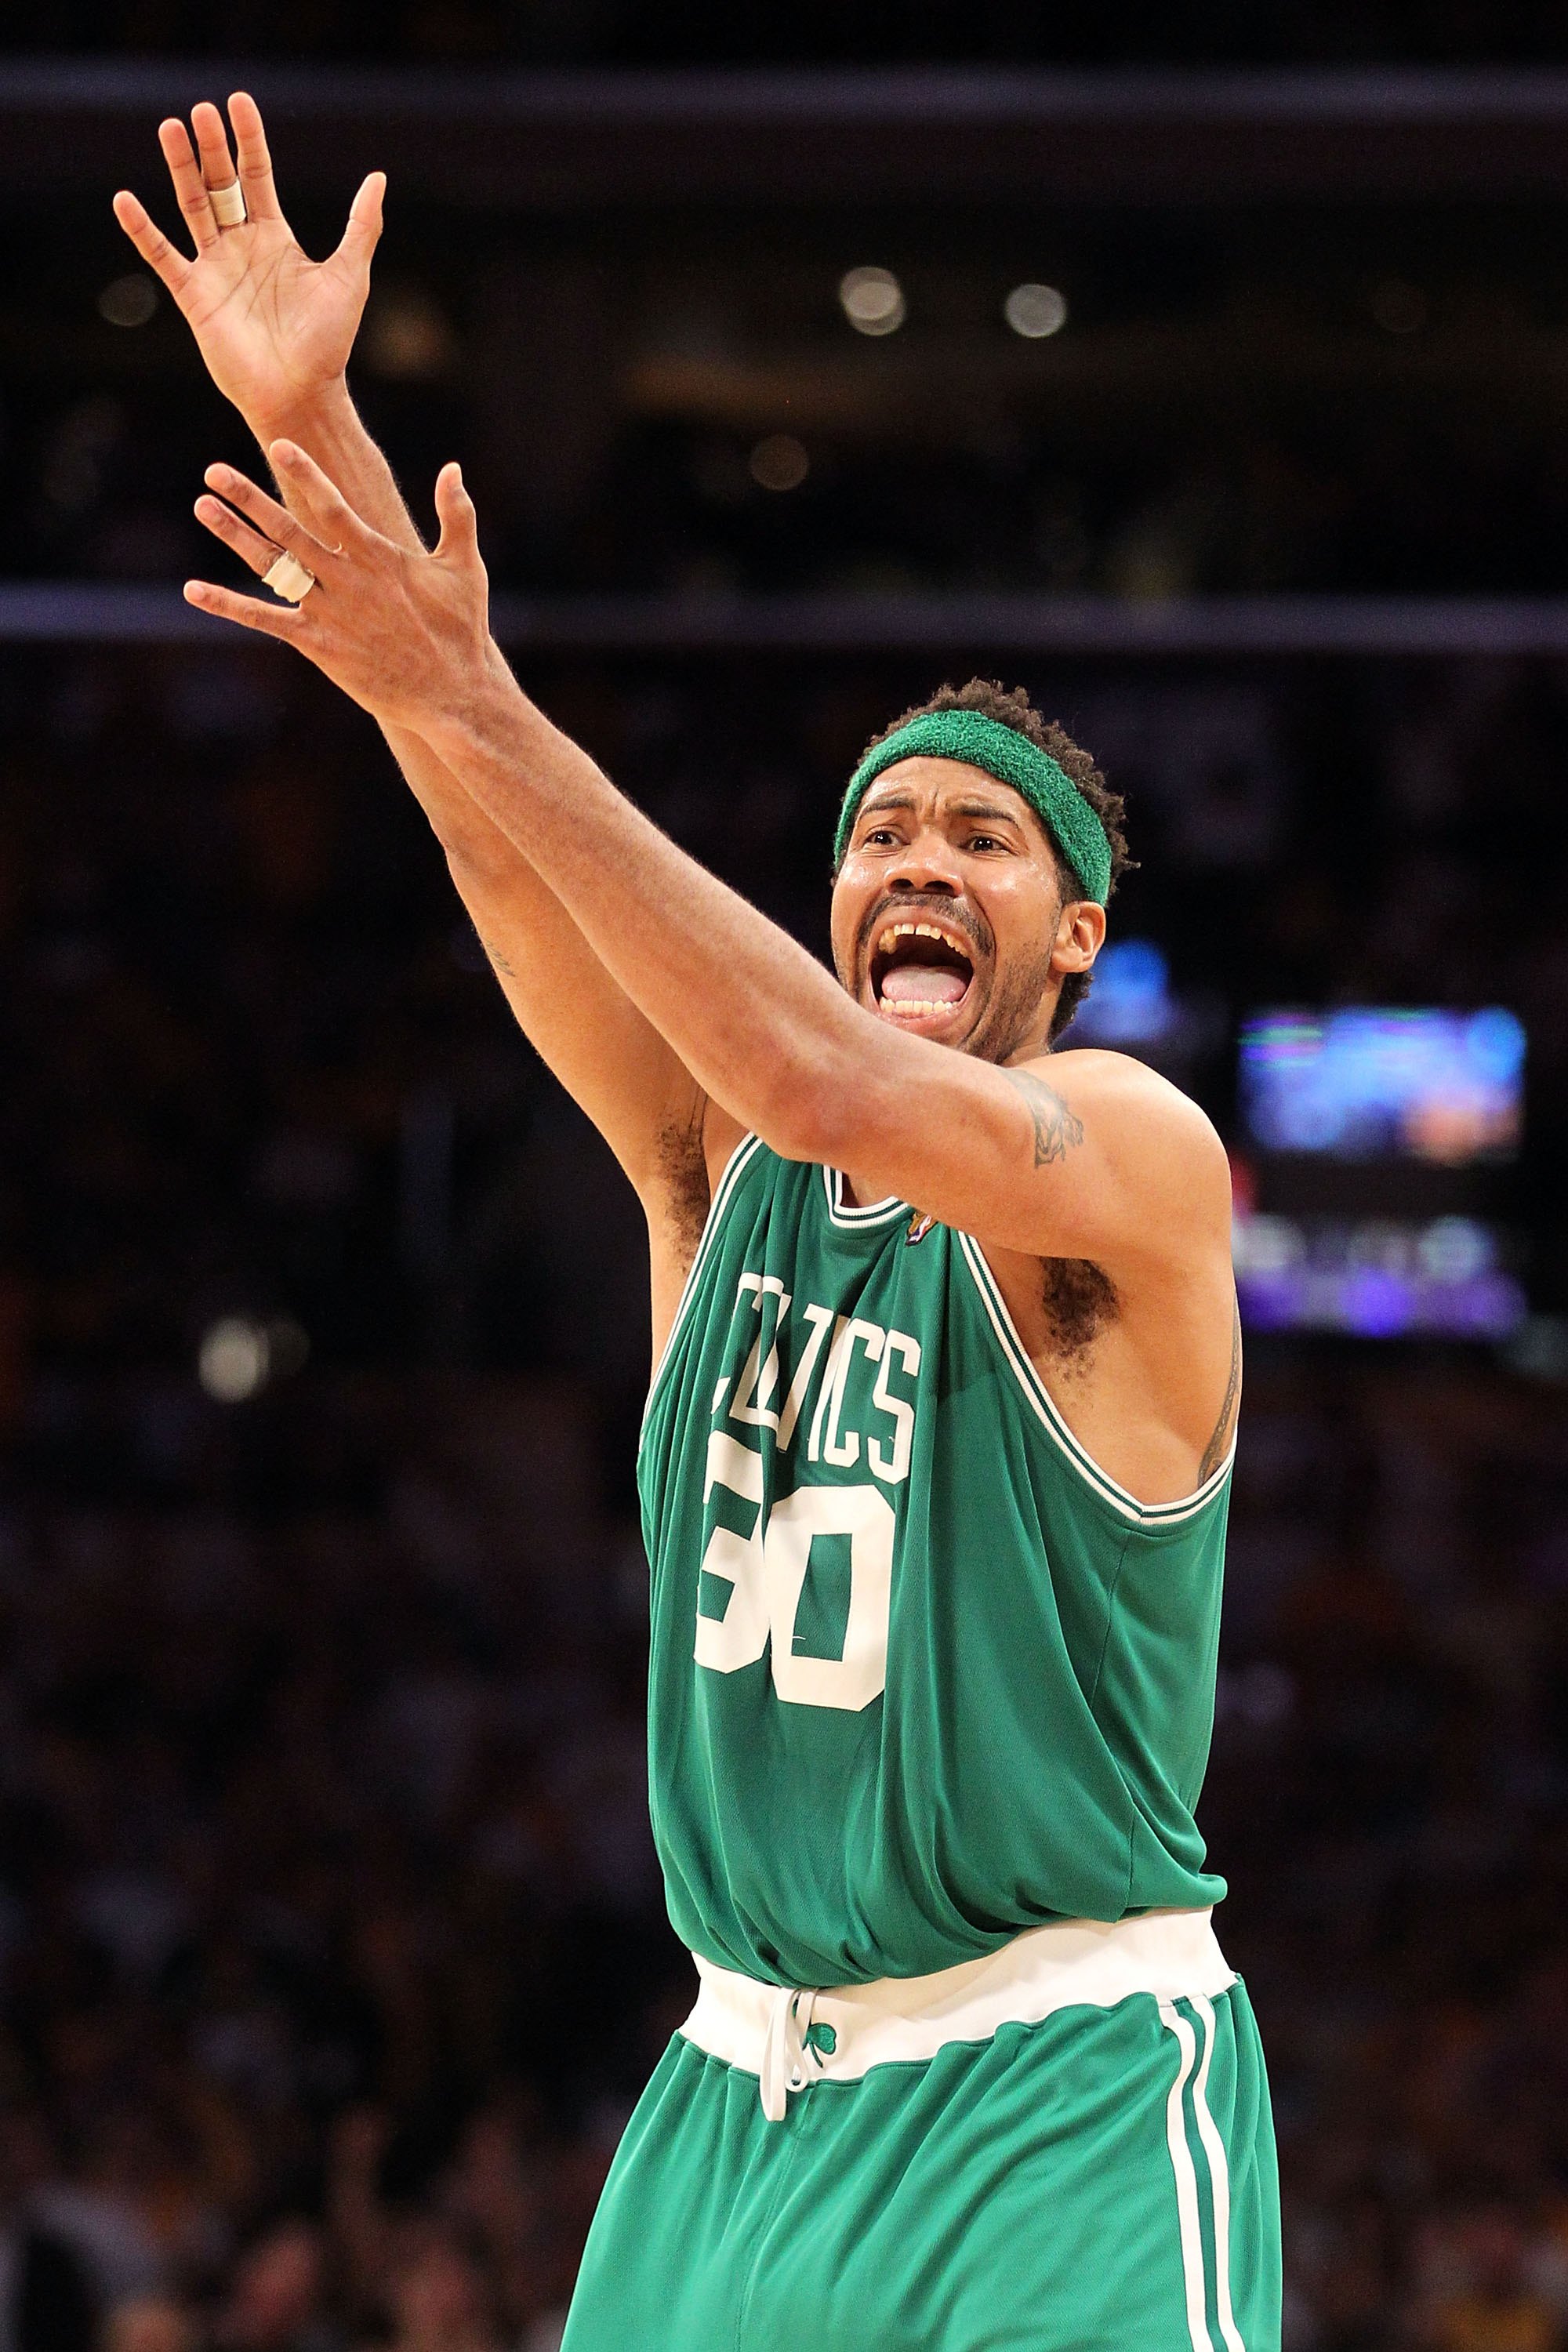 LOS ANGELES, CA - JUNE 17:  Rasheed Wallace #30 of the Boston Celtics reacts against the Los Angeles Lakers in Game Seven of the 2010 NBA Finals at Staples Center on June 17, 2010 in Los Angeles, California.  NOTE TO USER: User expressly acknowledges and